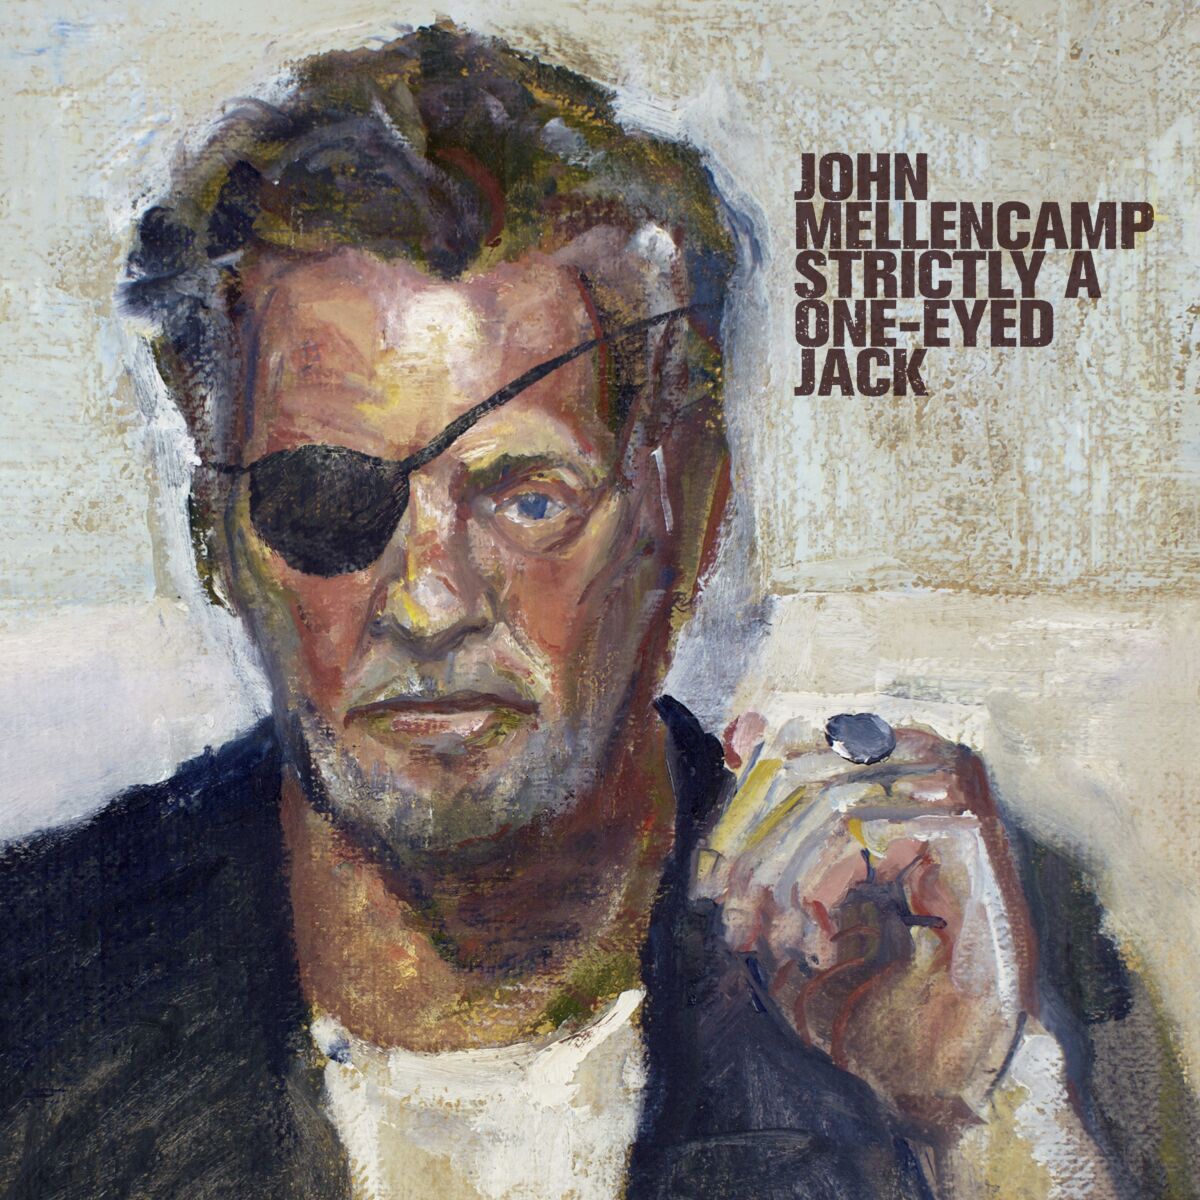 This cover image released by Republic Records shows "Strictly a One-Eyed Jack" by John Mellencamp. (Republic Records via AP)